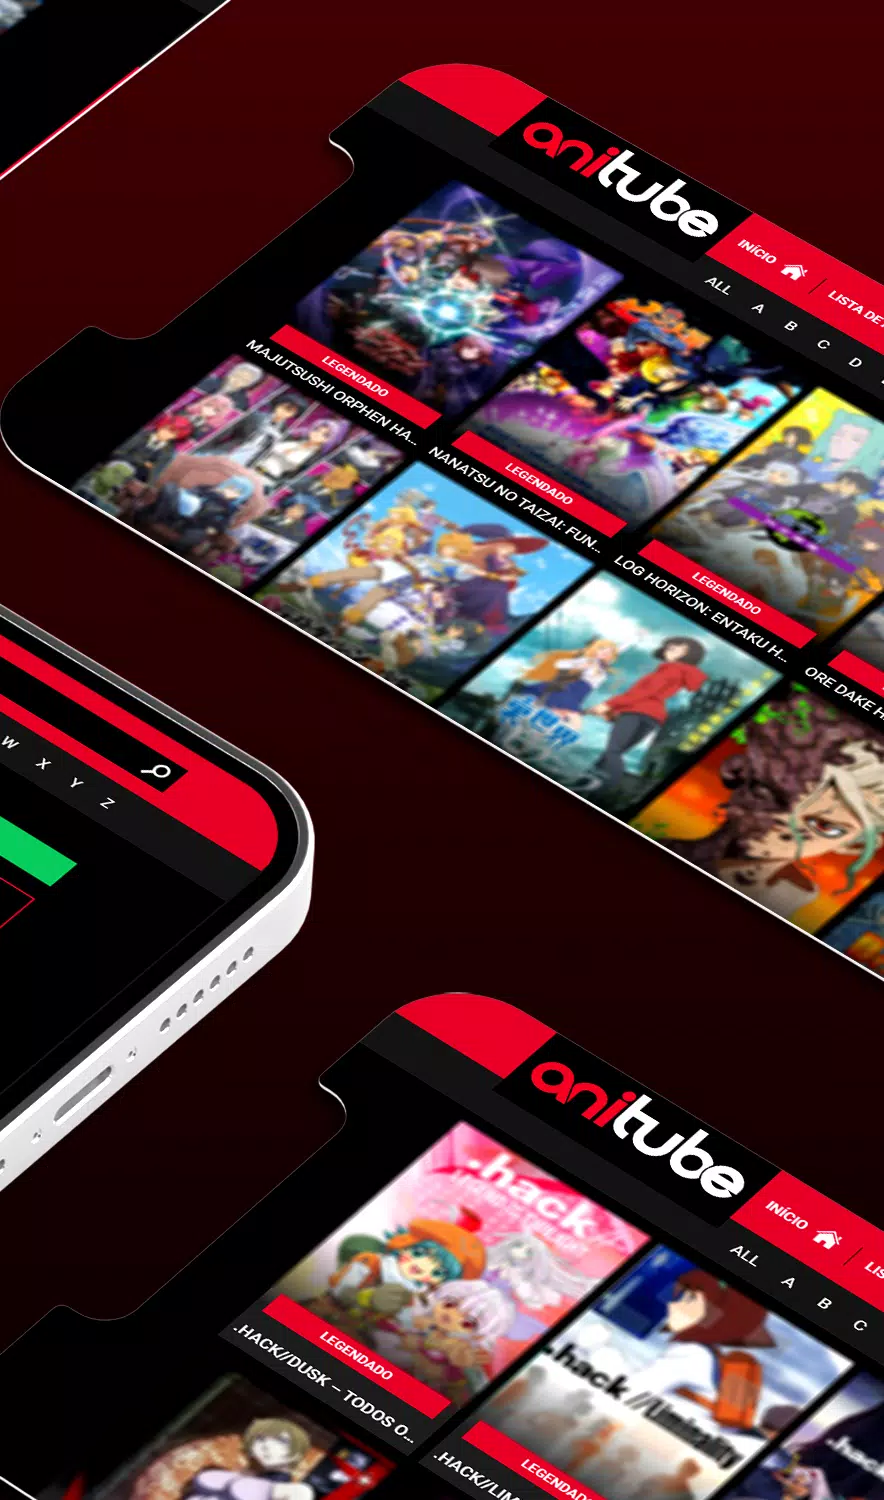 Anitube App - Assistir Animes Online APK (Android App) - Free Download